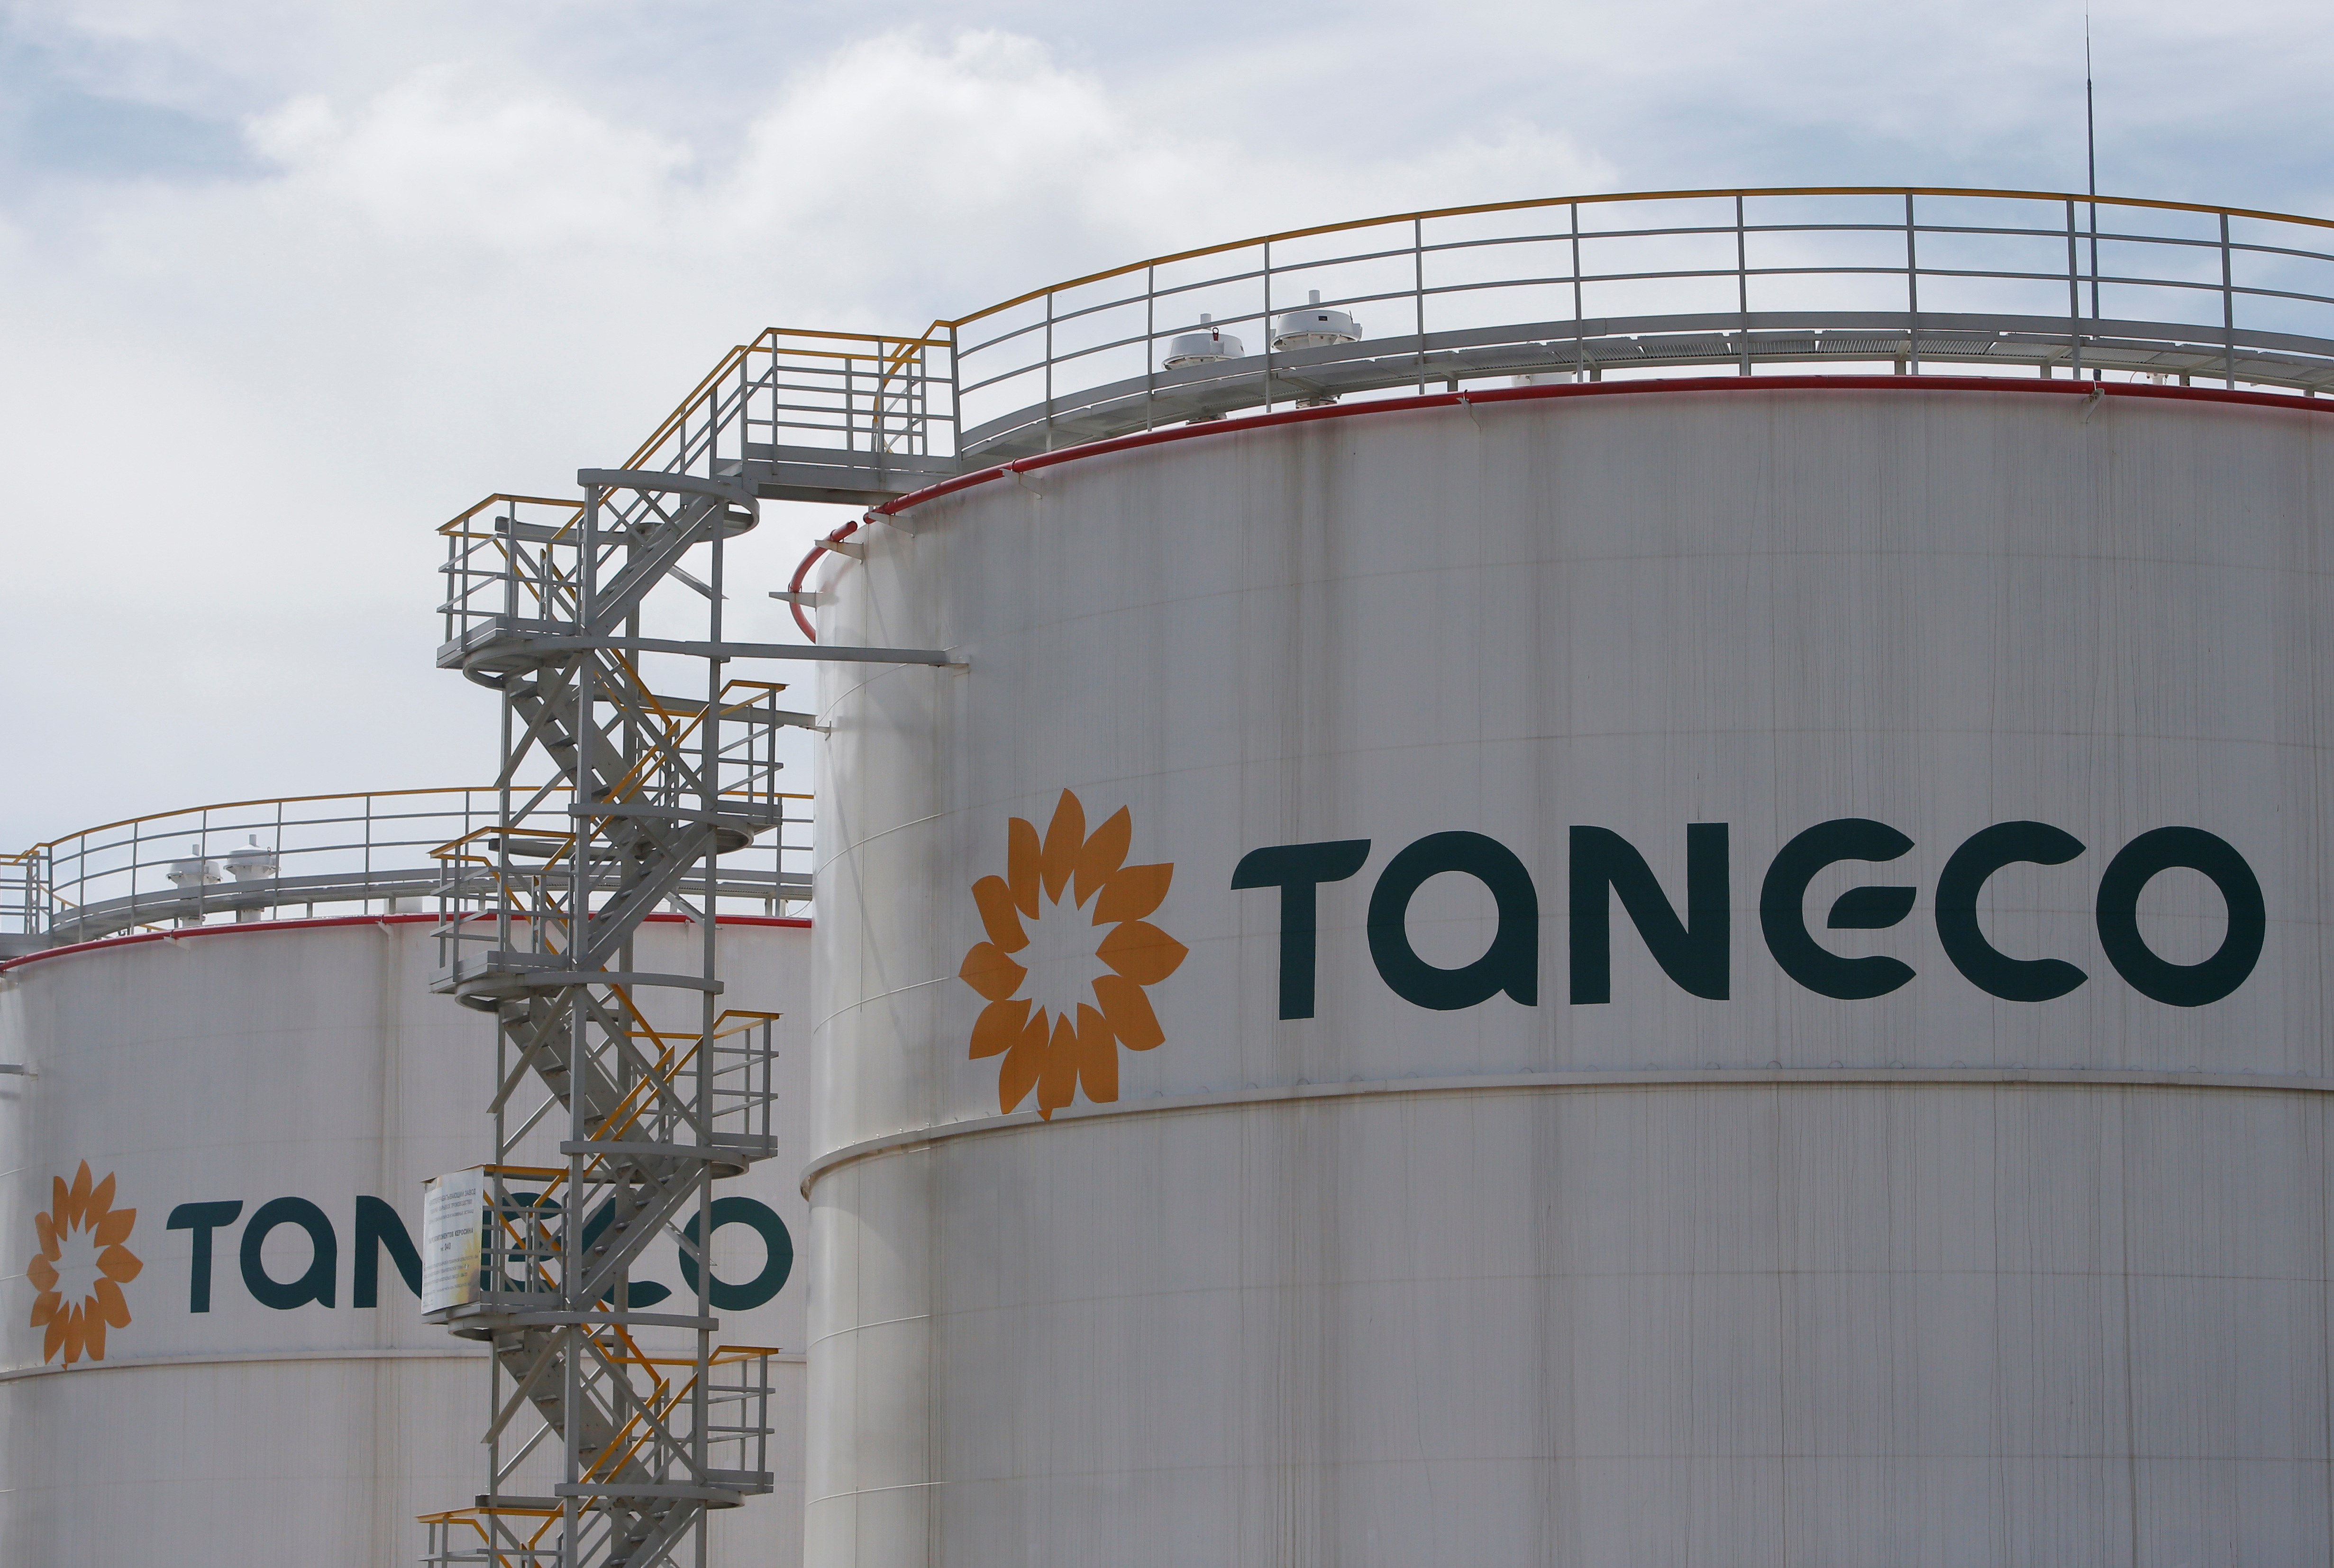 The logo of Taneco are seen on tanks at its refinery complex, which is part of Russia's oil producer Tatneft group of companies, in Nizhnekamskin